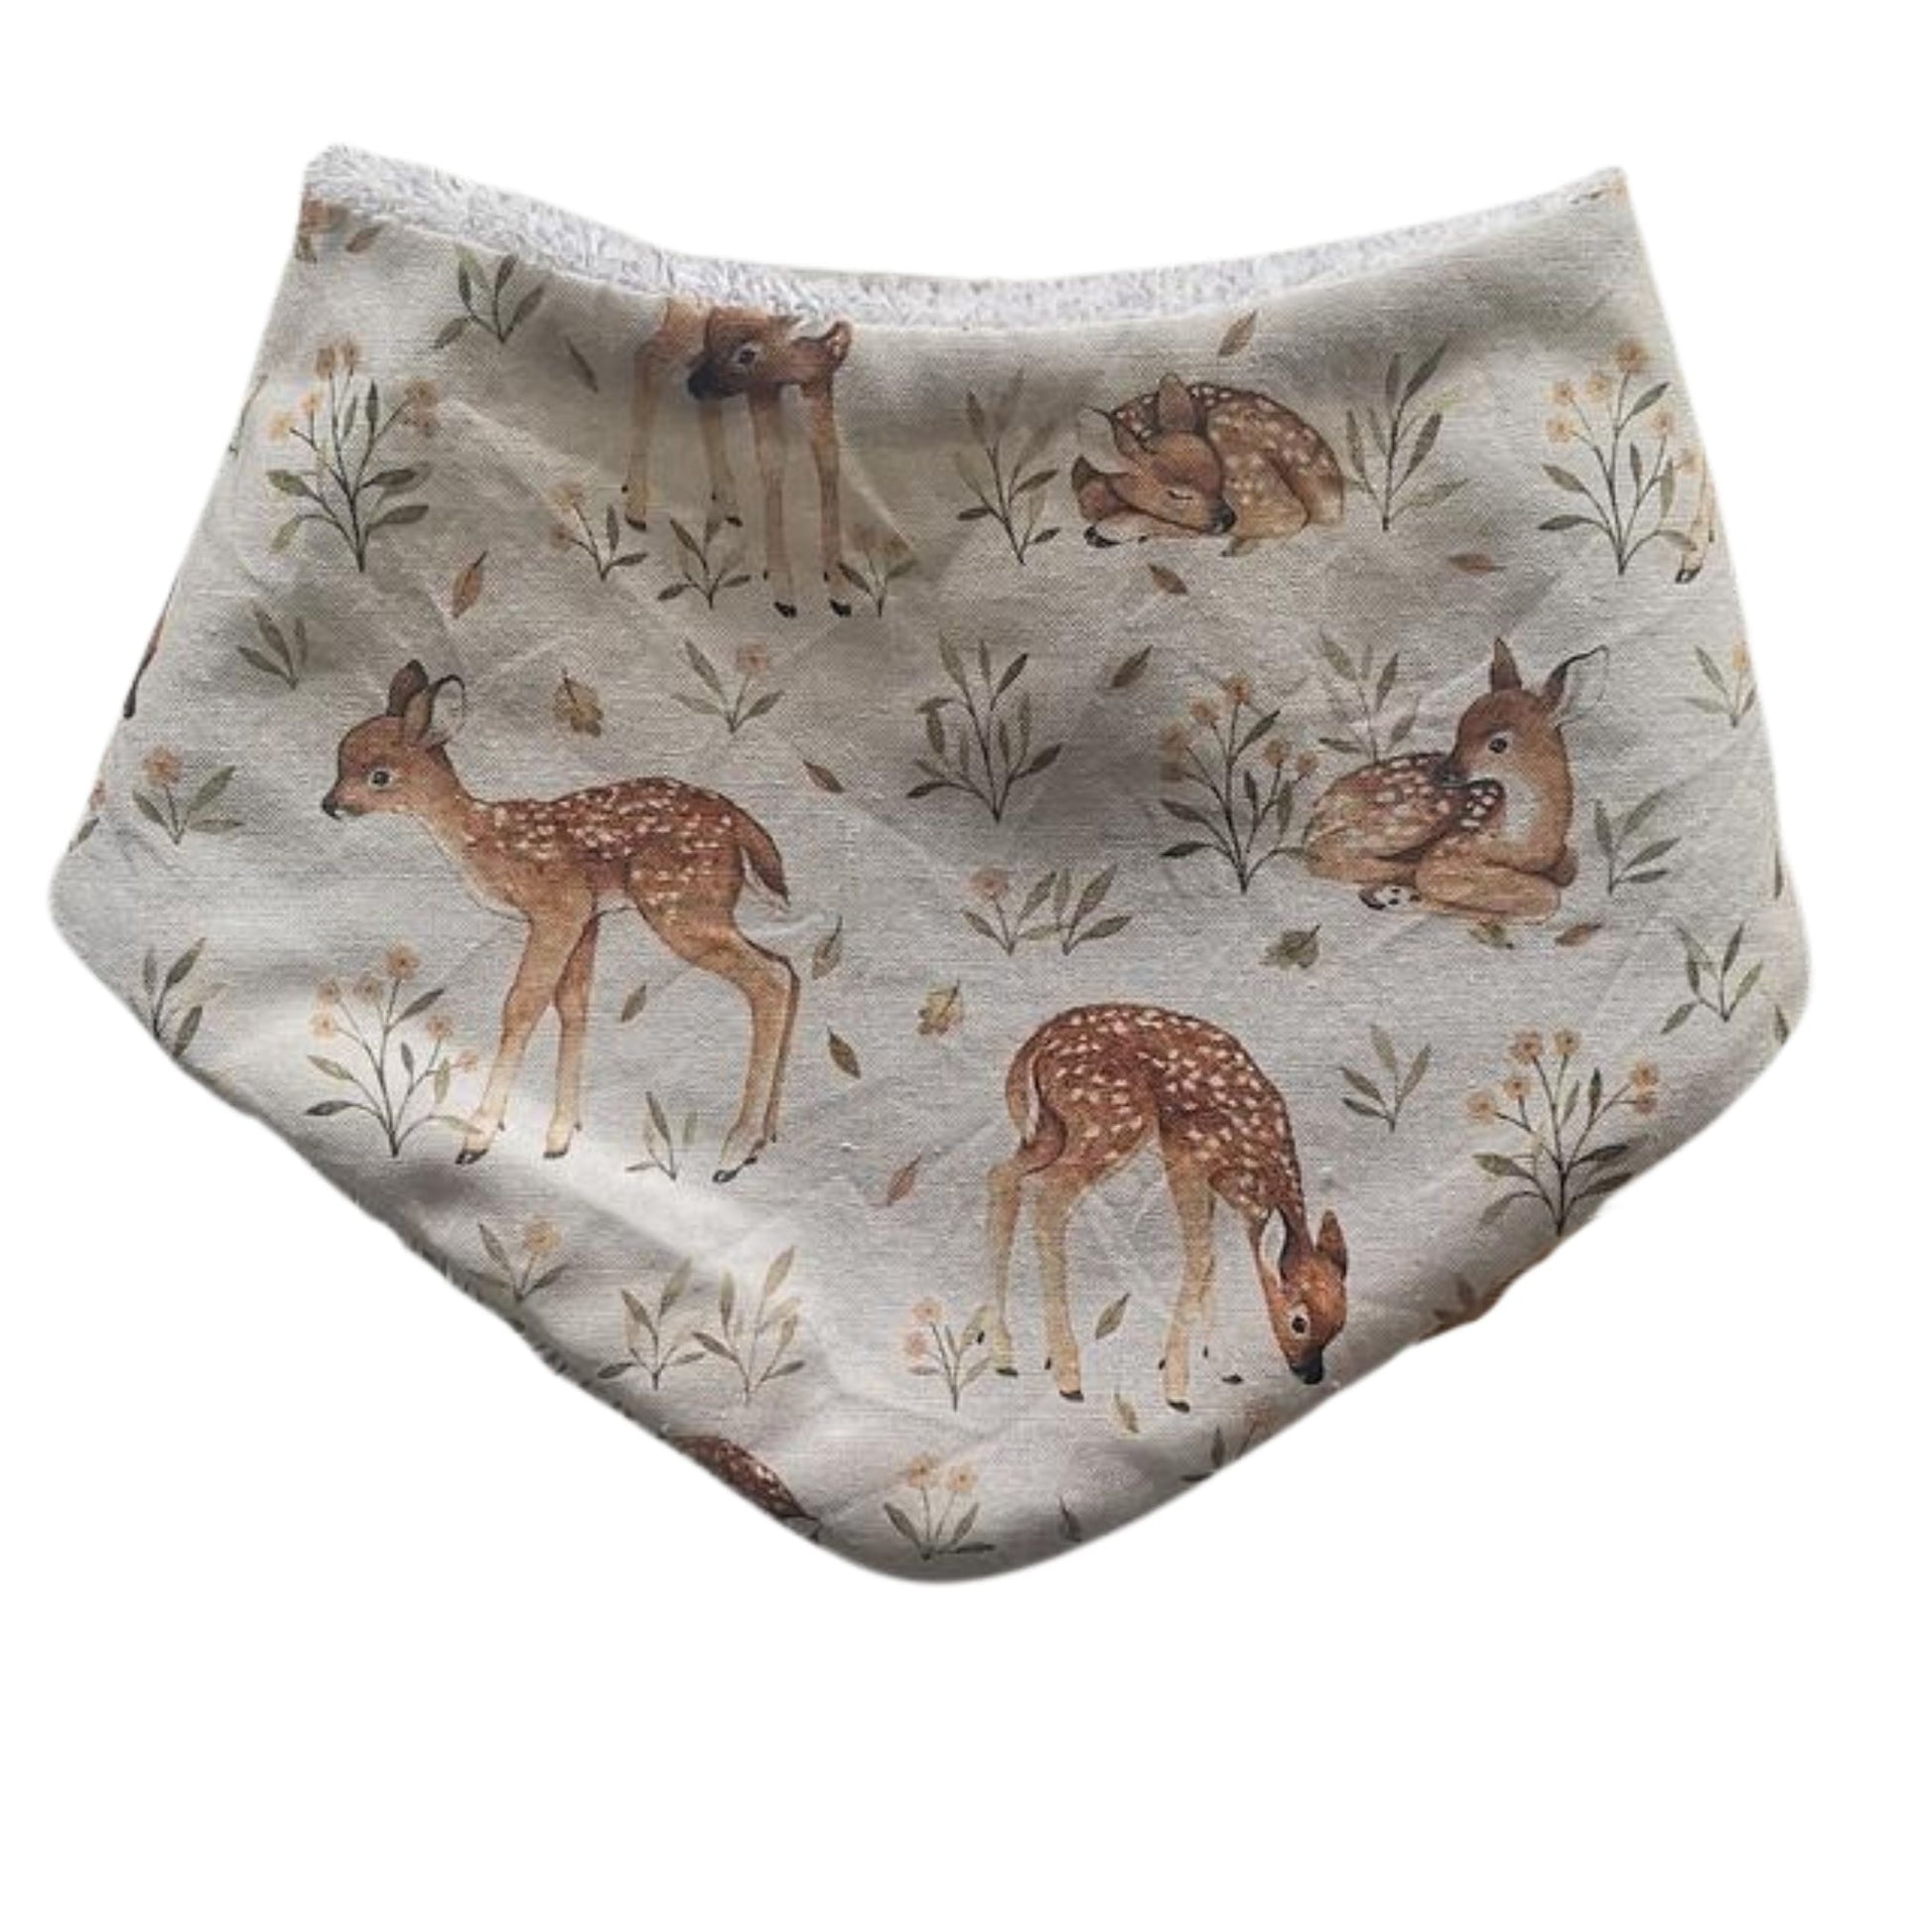 Baby dribble bib in cream fabric with watercolour deer fawns and flowers.